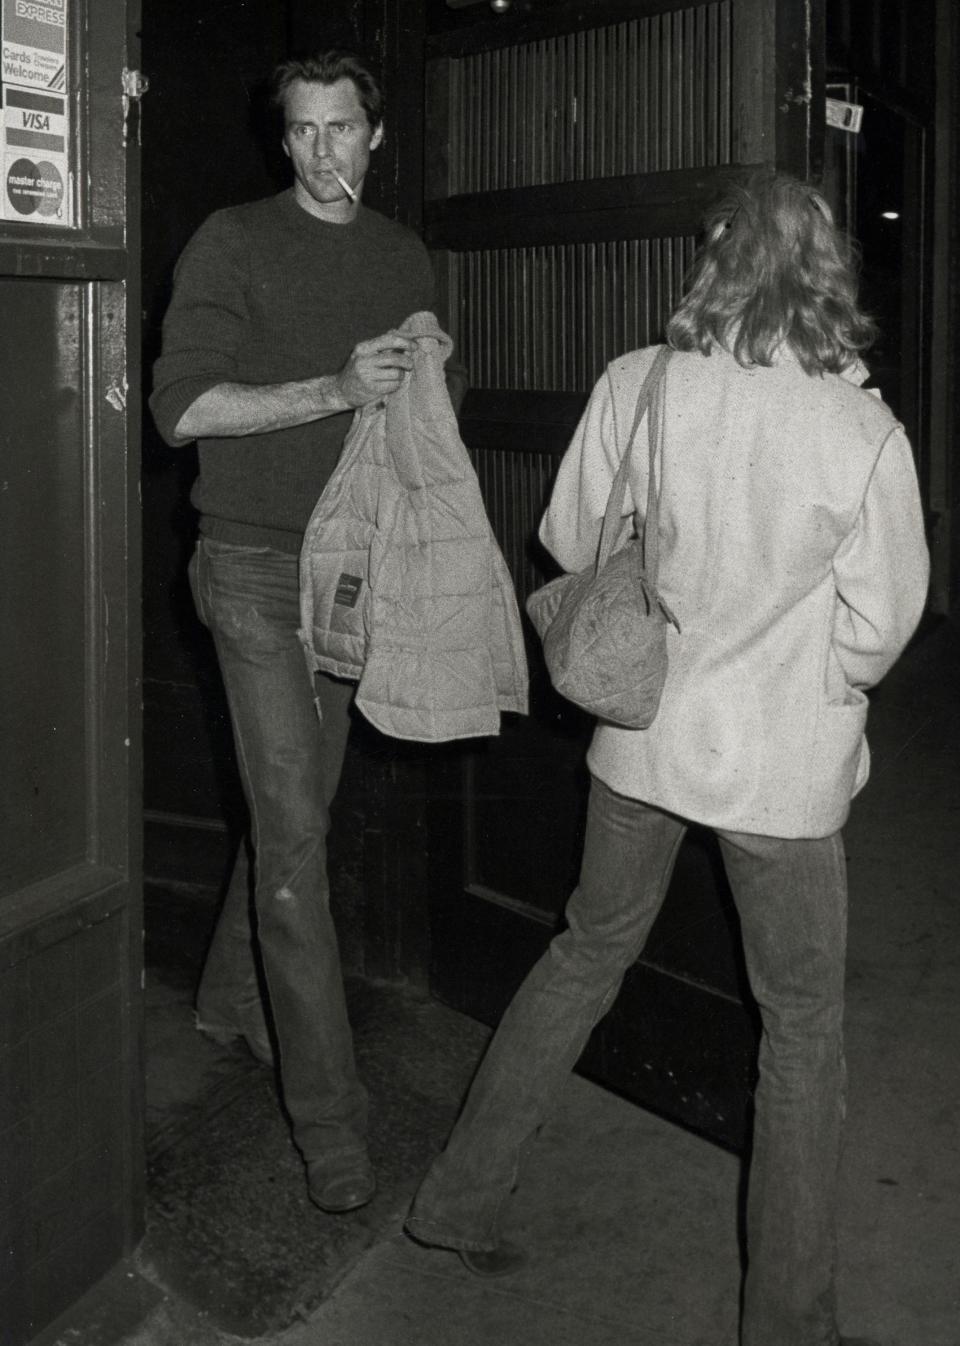 Jessica Lange and Sam Shepard in West Hollywood, California,1982